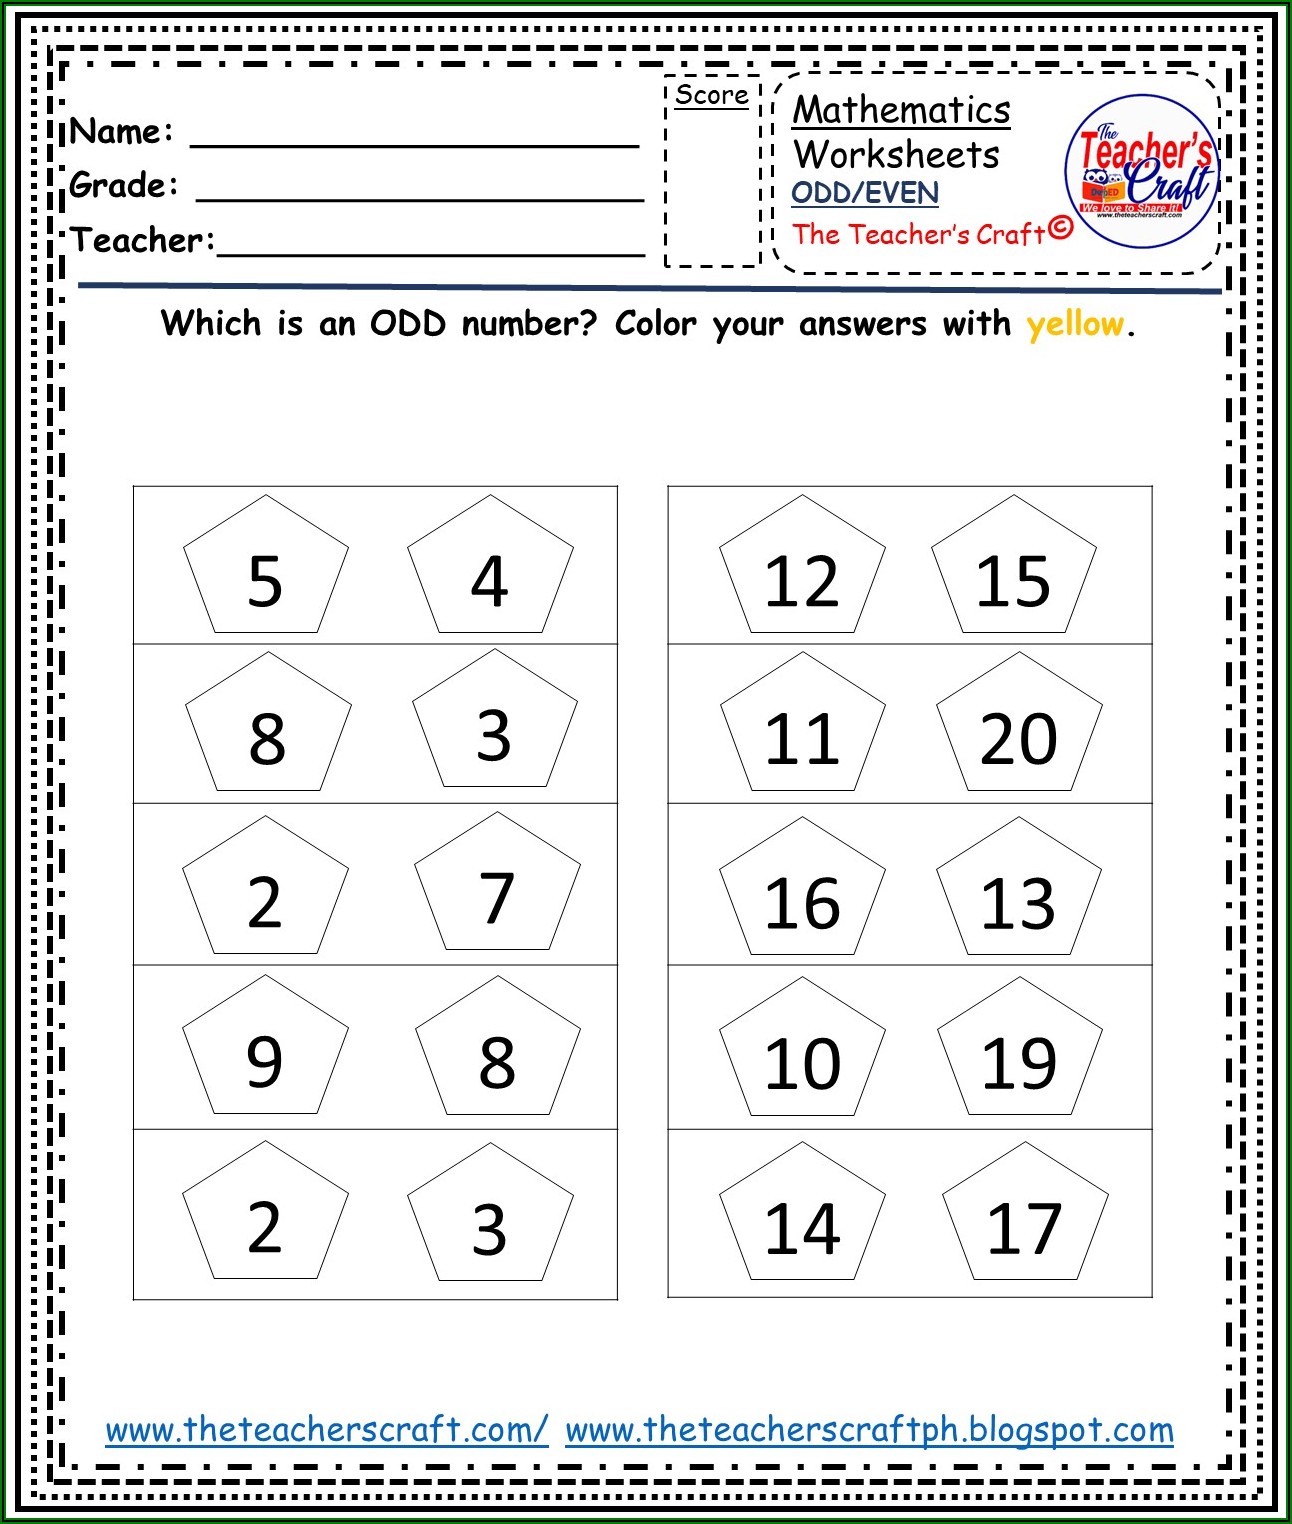 Odd And Even Numbers Worksheet Year 1